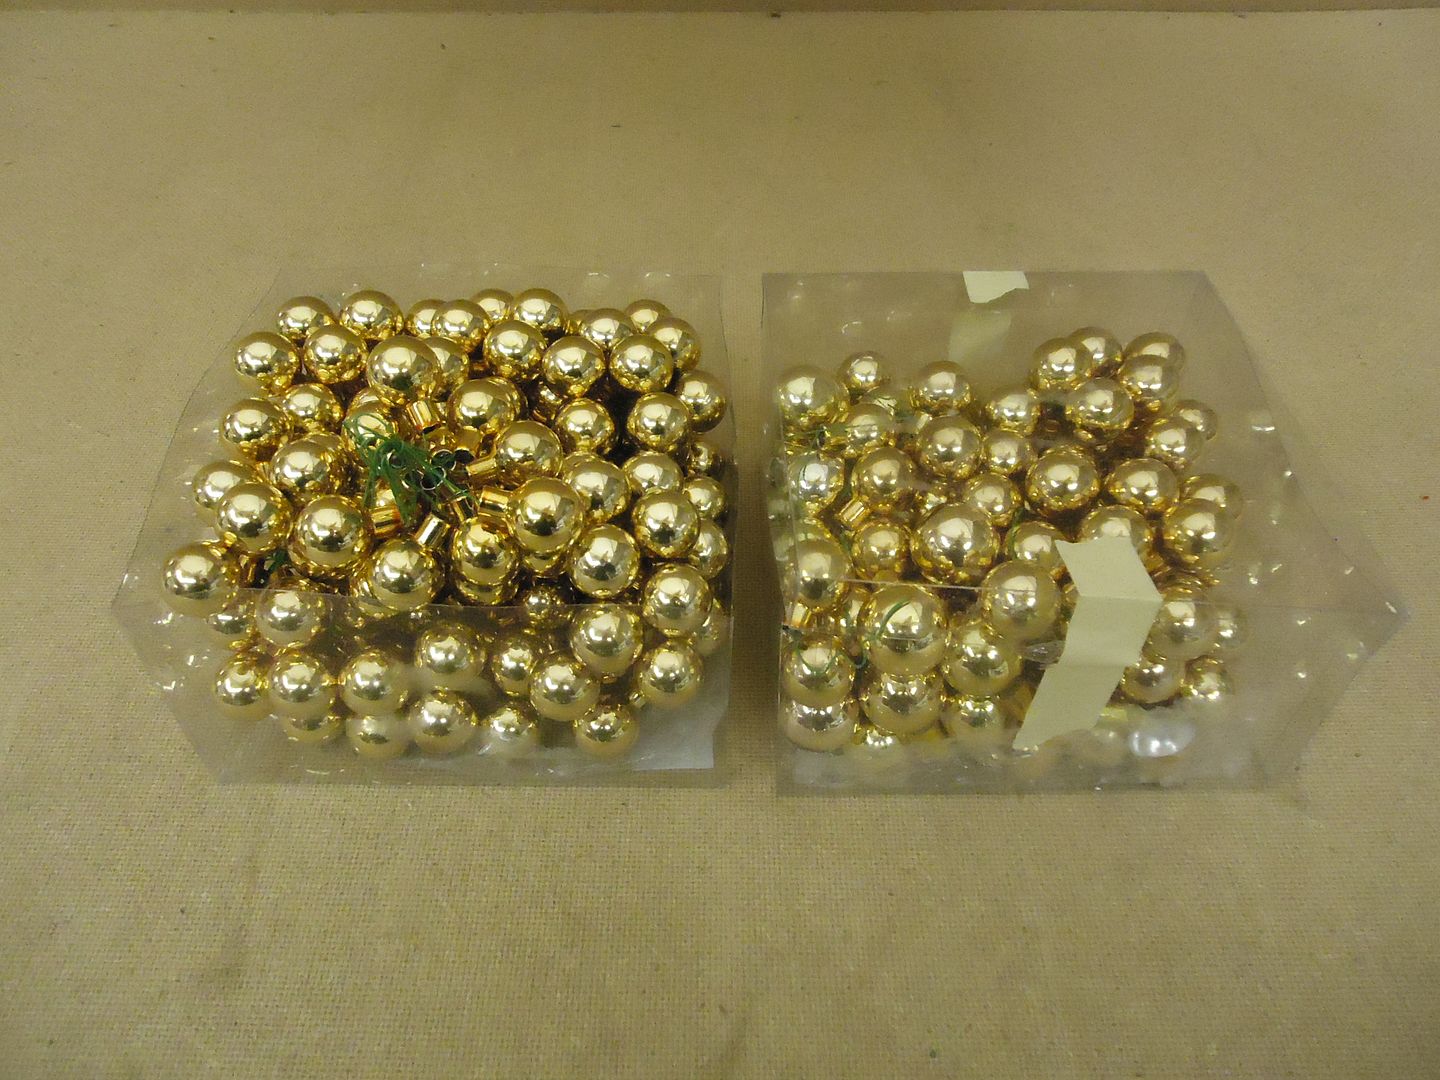 Designer Glass Balls Decorative Gold About 1in Lot of 80